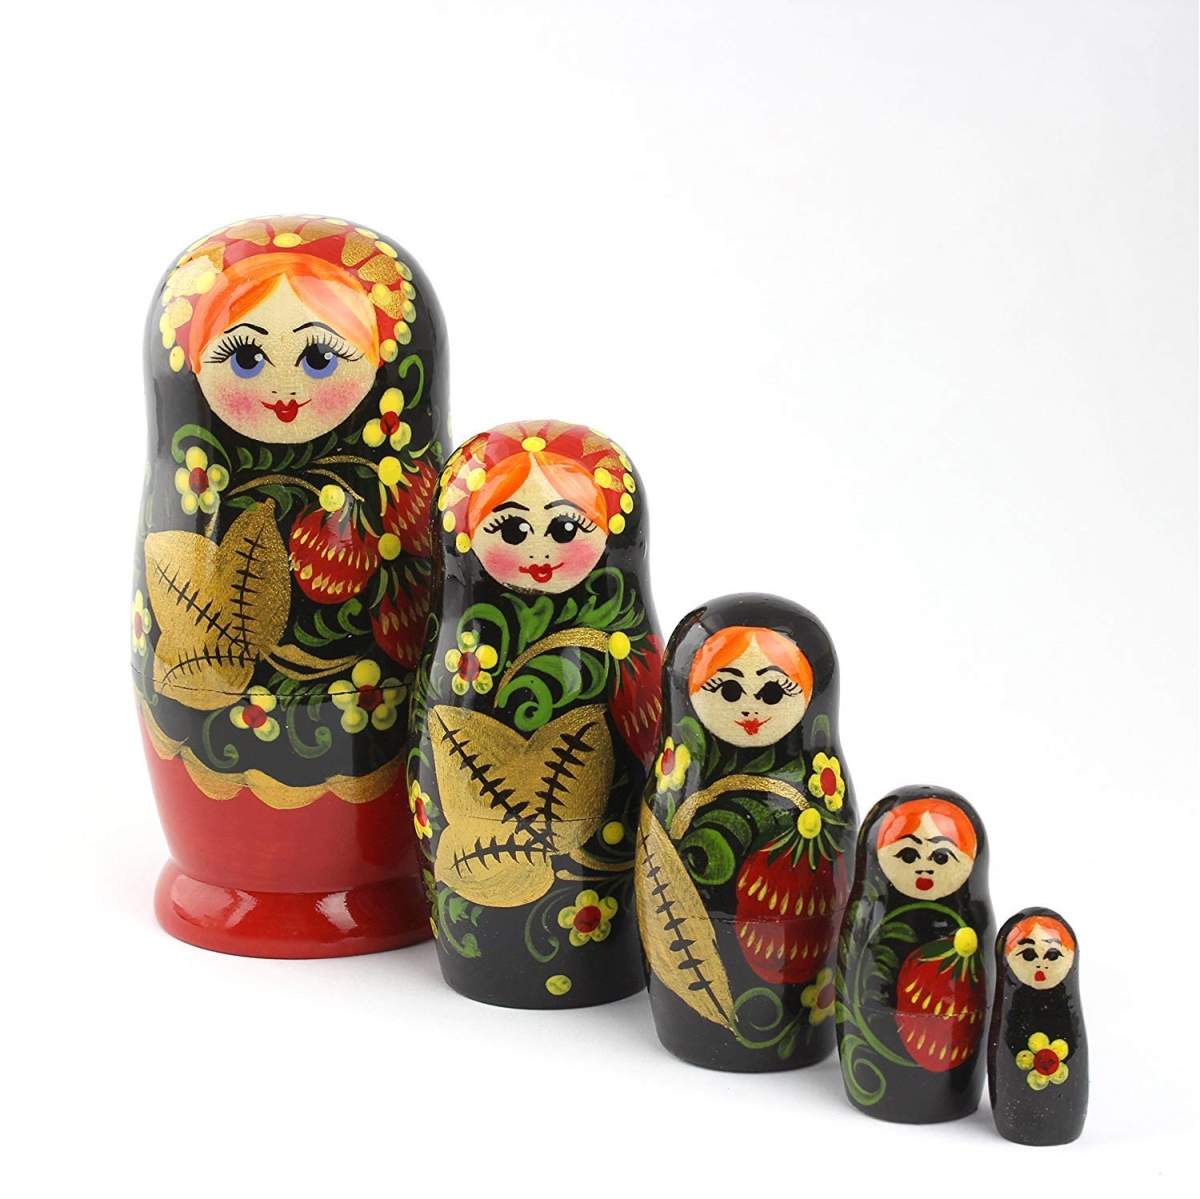 Picture of G.DeBrekht 140076 5 Piece Russian Matryoshka Wooden Stacking Horsey Ride Prince Nested Dolls Set